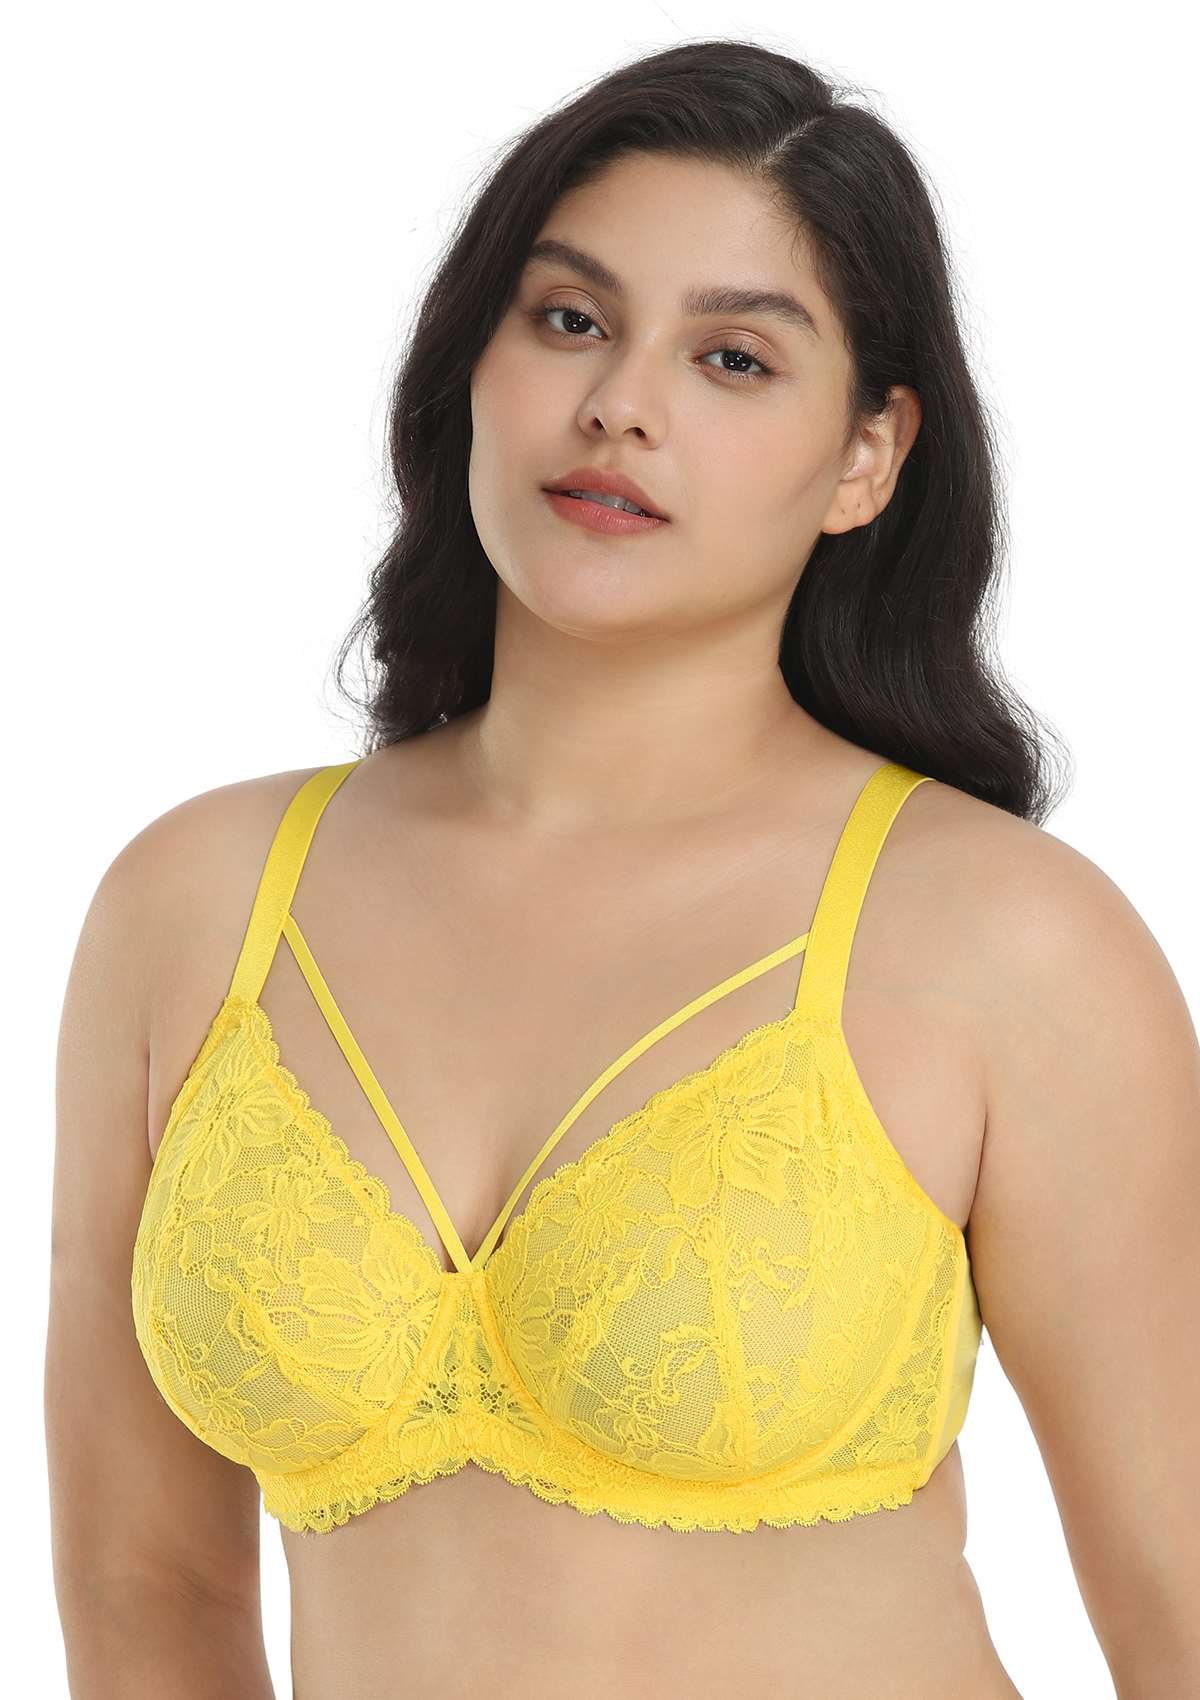 HSIA Unlined Lace Mesh Minimizer Bra For Large Breasts, Full Coverage - Bright Yellow / 36 / I